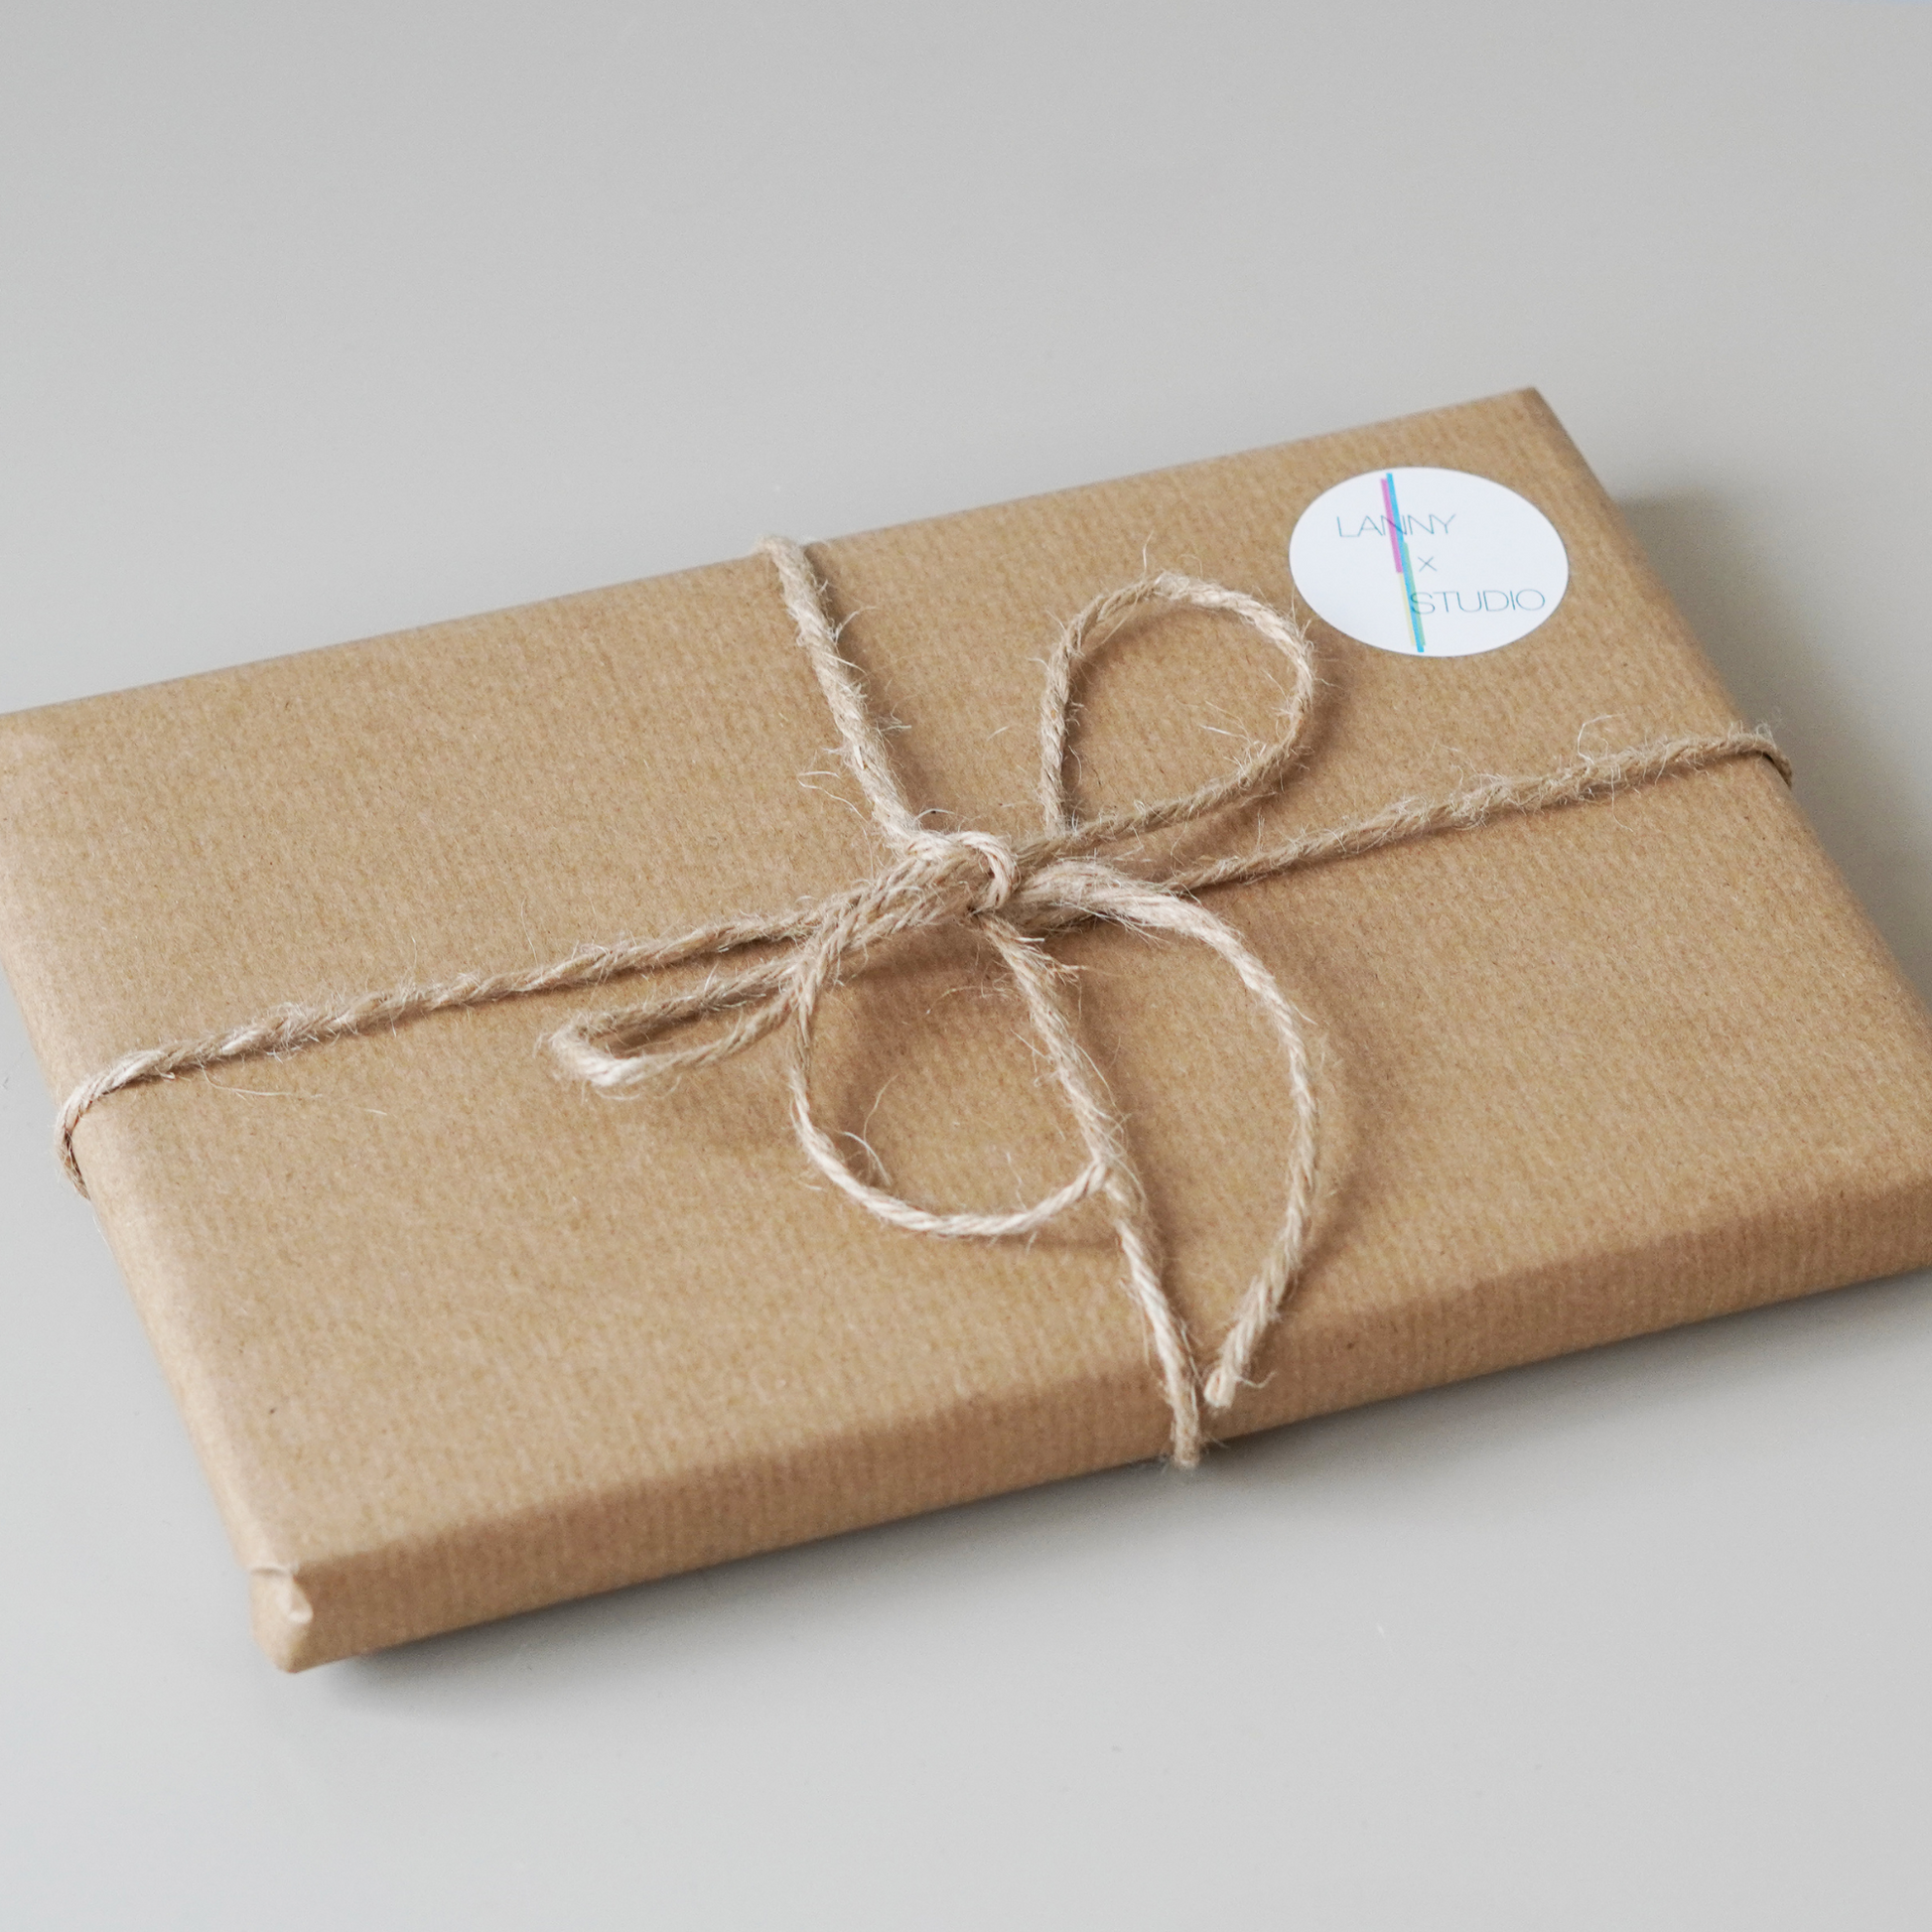 Gift wrapped box with eco packaging. 